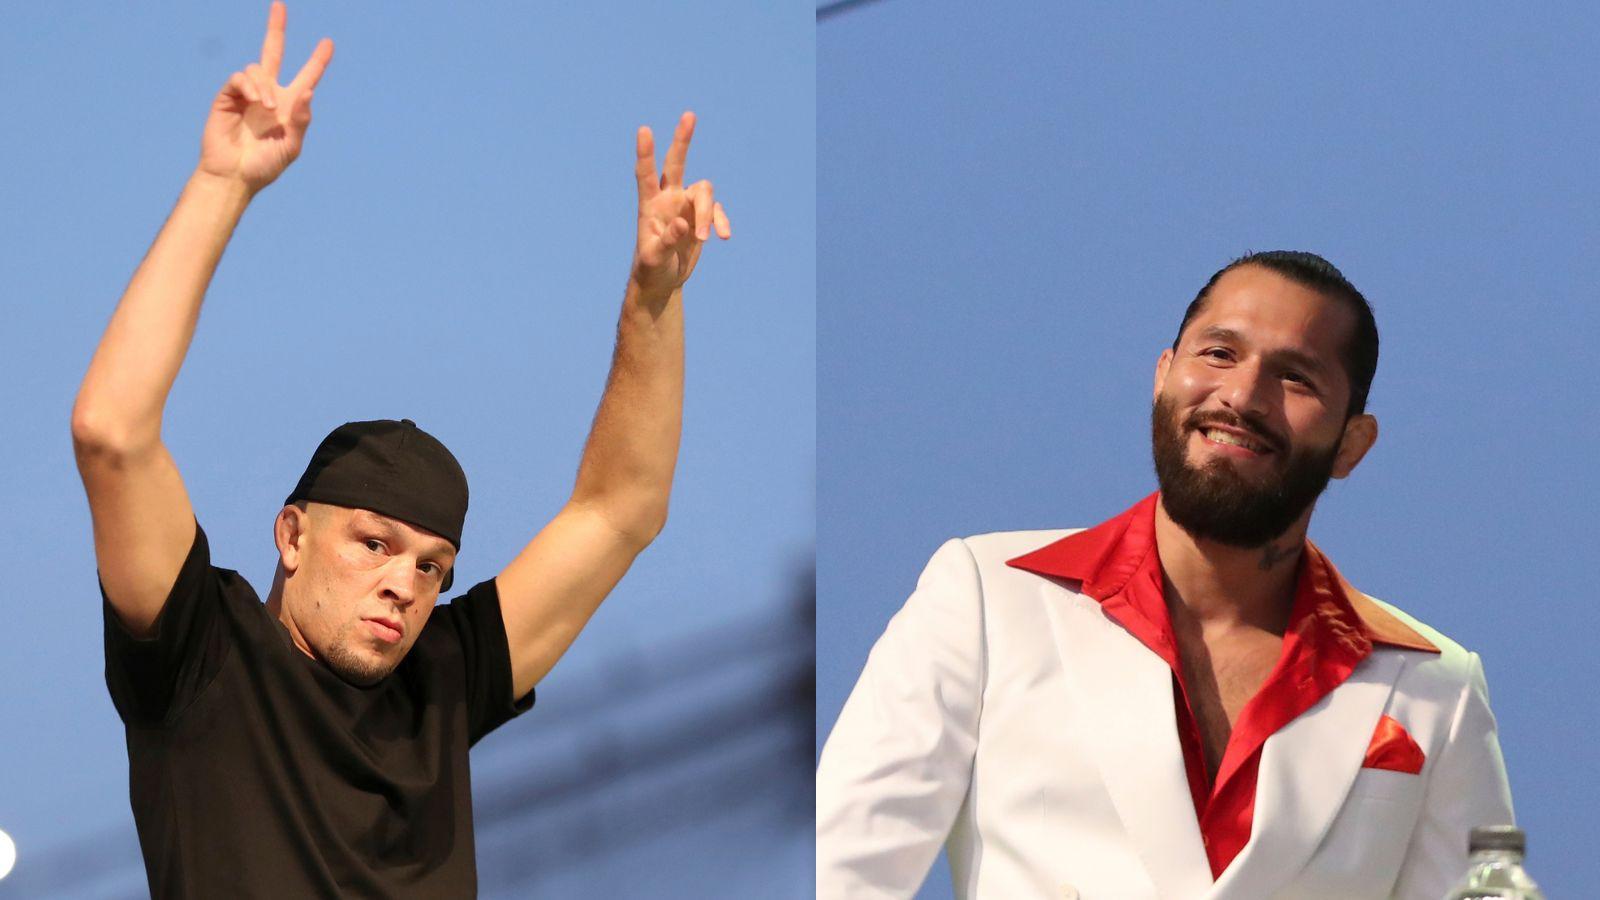 Nate Diaz (left) and Jorge Masvidal (right) in streetclothes at a UFC 244 press conference.